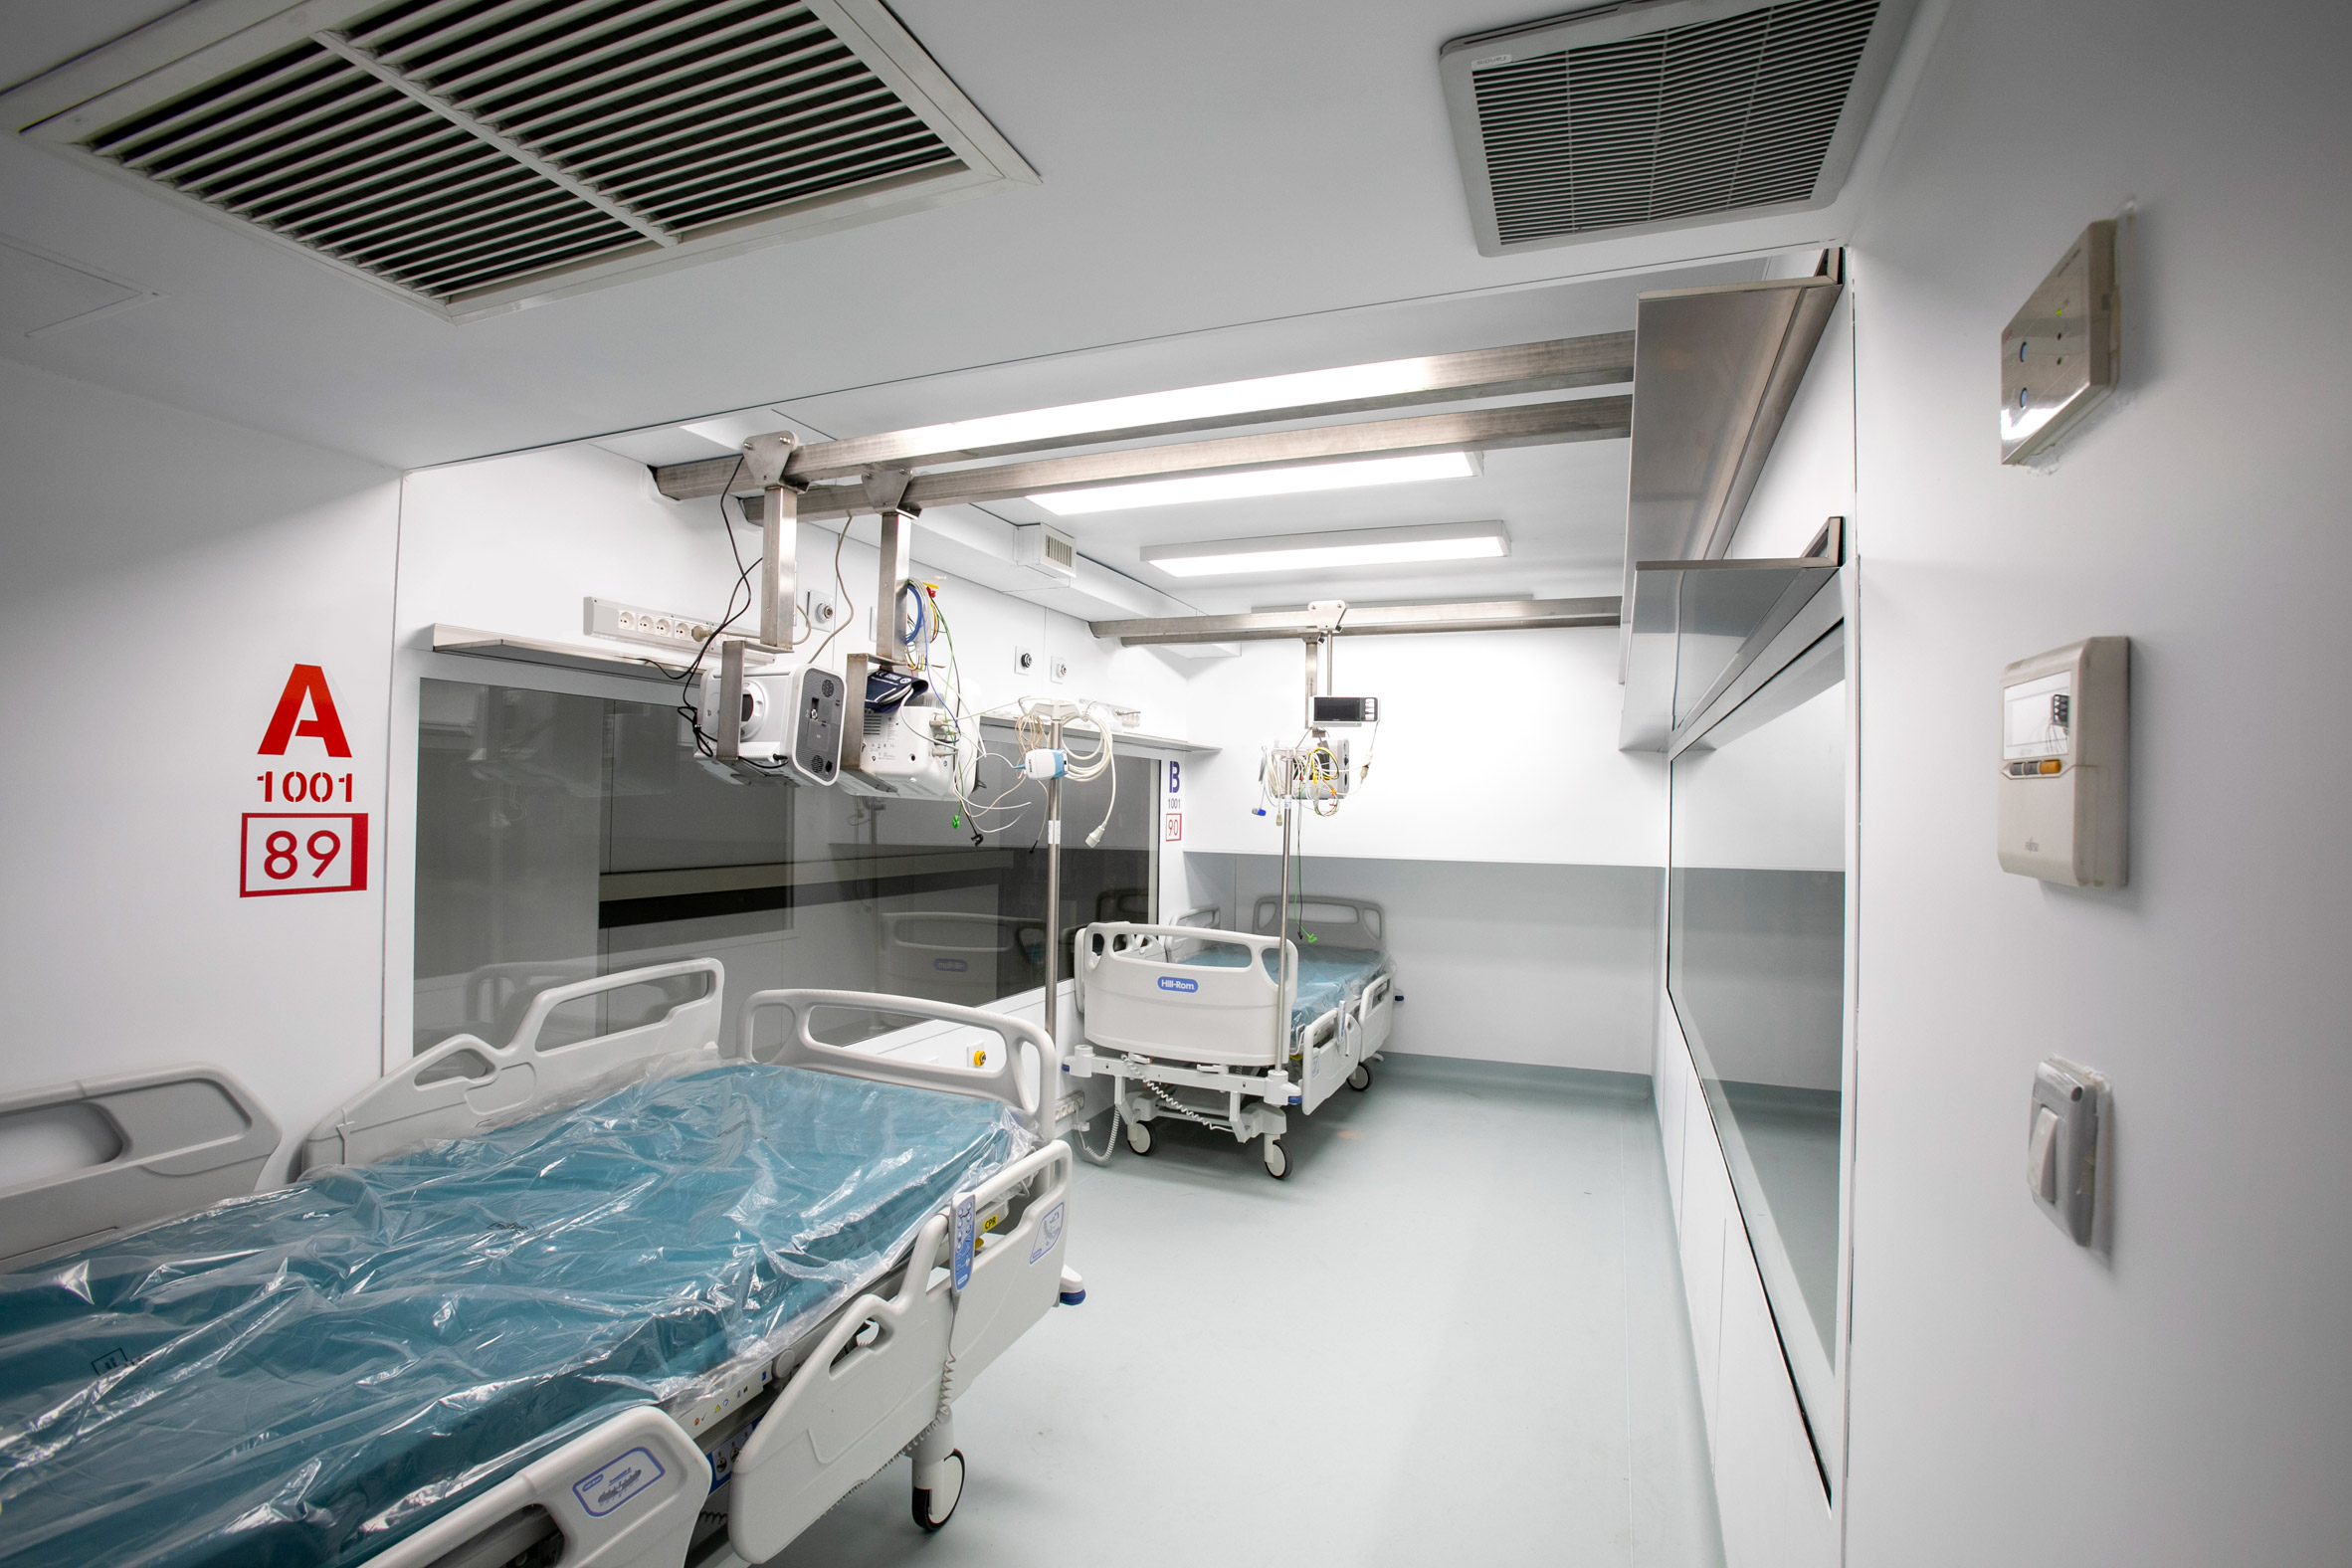 A two-bed intensive care unit within a shipping container, designed by Italian architects Carlo Ratti and Italo Rota, has been built at a hospital in Turin and is being used to treat patients fighting the coronavirus. Named Connected Units for Respiratory Ailments – or CURA, which is the latin word for cure – the intensive care pod was installed to increase intensive care unit (ICU) capacity in northern Italy. Designed by Ratti and Rota to treat two patients requiring intensive care, the unit has been installed at a temporary hospital built within the Officine Grandi Riparazioni complex in central Turin. The first patient was admitted earlier this week on 19 April.   Connected Units for Respiratory Ailments (CURA) intensive care  shipping-container pod by Carlo Ratti and Italo Rota   Built within a 6.1-metre-long shipping container, the intensive care pod contains two beds along with ventilators, monitors, intravenous fluid stands and syringe drivers. According to Ratti the pods combine the benefits of tents with permanent isolation wards as it has a ventilation system that generates negative pressure – a common technique used in hospitals to prevent contaminated air from escaping. The designers say the unit has been designed to comply with Airborne Infection Isolation Rooms (AIIRs) standards. "CURA strives to be as fast to be mounted as a hospital tent, but as safe as a regular isolation ward to work in, thanks to the comprehensive biocontainment equipment," said the designers.   The pod  It is extractor creates indoor negative pressure to comply with the standards of Airborne Infection Isolation Rooms. Two glass windows carved on the opposite sides of the containers are meant for doctors to always get a sense of the status of patients both inside and outside the pods. Also, this would potentially allow external visitors to get closer to their relatives in a safer and more humane setting.   "CURA aims to improve the efficiency of the existing design solutions of field hospitals, producing a compact ICU pod that is quick-to-deploy and safe to work in for medical professionals." The pod in Turin is the first CURA pod to be built, but further units are already under construction in other parts of the world including the UAE and Canada. CURA has been developed as an open-source project, with its tech specs, drawings and design materials made accessible for everyone online on https://curapods.org/open-source-files.   The pods are designed to work as single units, as the one in Turin is set up, or combined to create larger field hospitals.   Photography is by Max Tomasinelli. Project credits: Design and innovation: CRA-Carlo Ratti Associati with Italo Rota Medical engineering: Humanitas Research Hospital Medical consultancy: Policlinico di Milano Master planning, design, construction and logistics support services: Jacobs Research: MIT Senseable City Lab Visual identity & graphic design: Studio FM milano Digital media: Squint/Opera Safety and certifications: IEC Engineering Logistics: Alex Neame of Team Rubicon UK MEP engineering: Ivan Pavanello of Projema Medical consultancy: Maurizio Lanfranco of Ospedale Cottolengo Medical equipment supply: Philips Painting products: Gruppo Boero Support: World Economic Forum Covid-19 Action Platform, and Cities, Infrastructure and Urban Services Platform